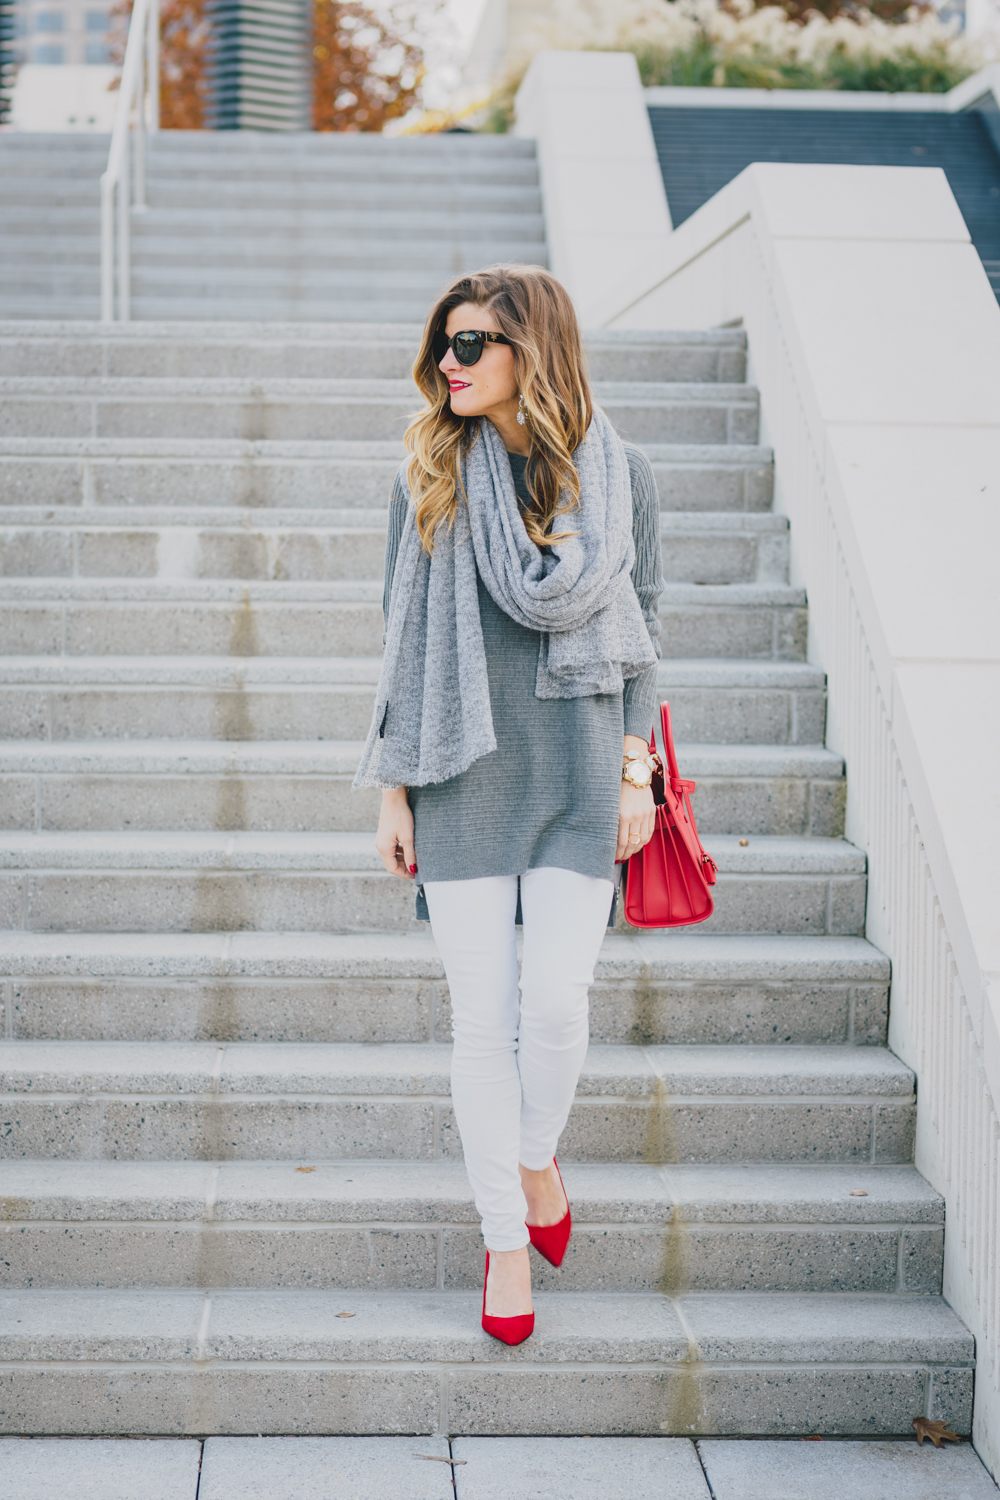 Oversized Grey Sweater + Grey Scarf + White Jeans + Red Pumps